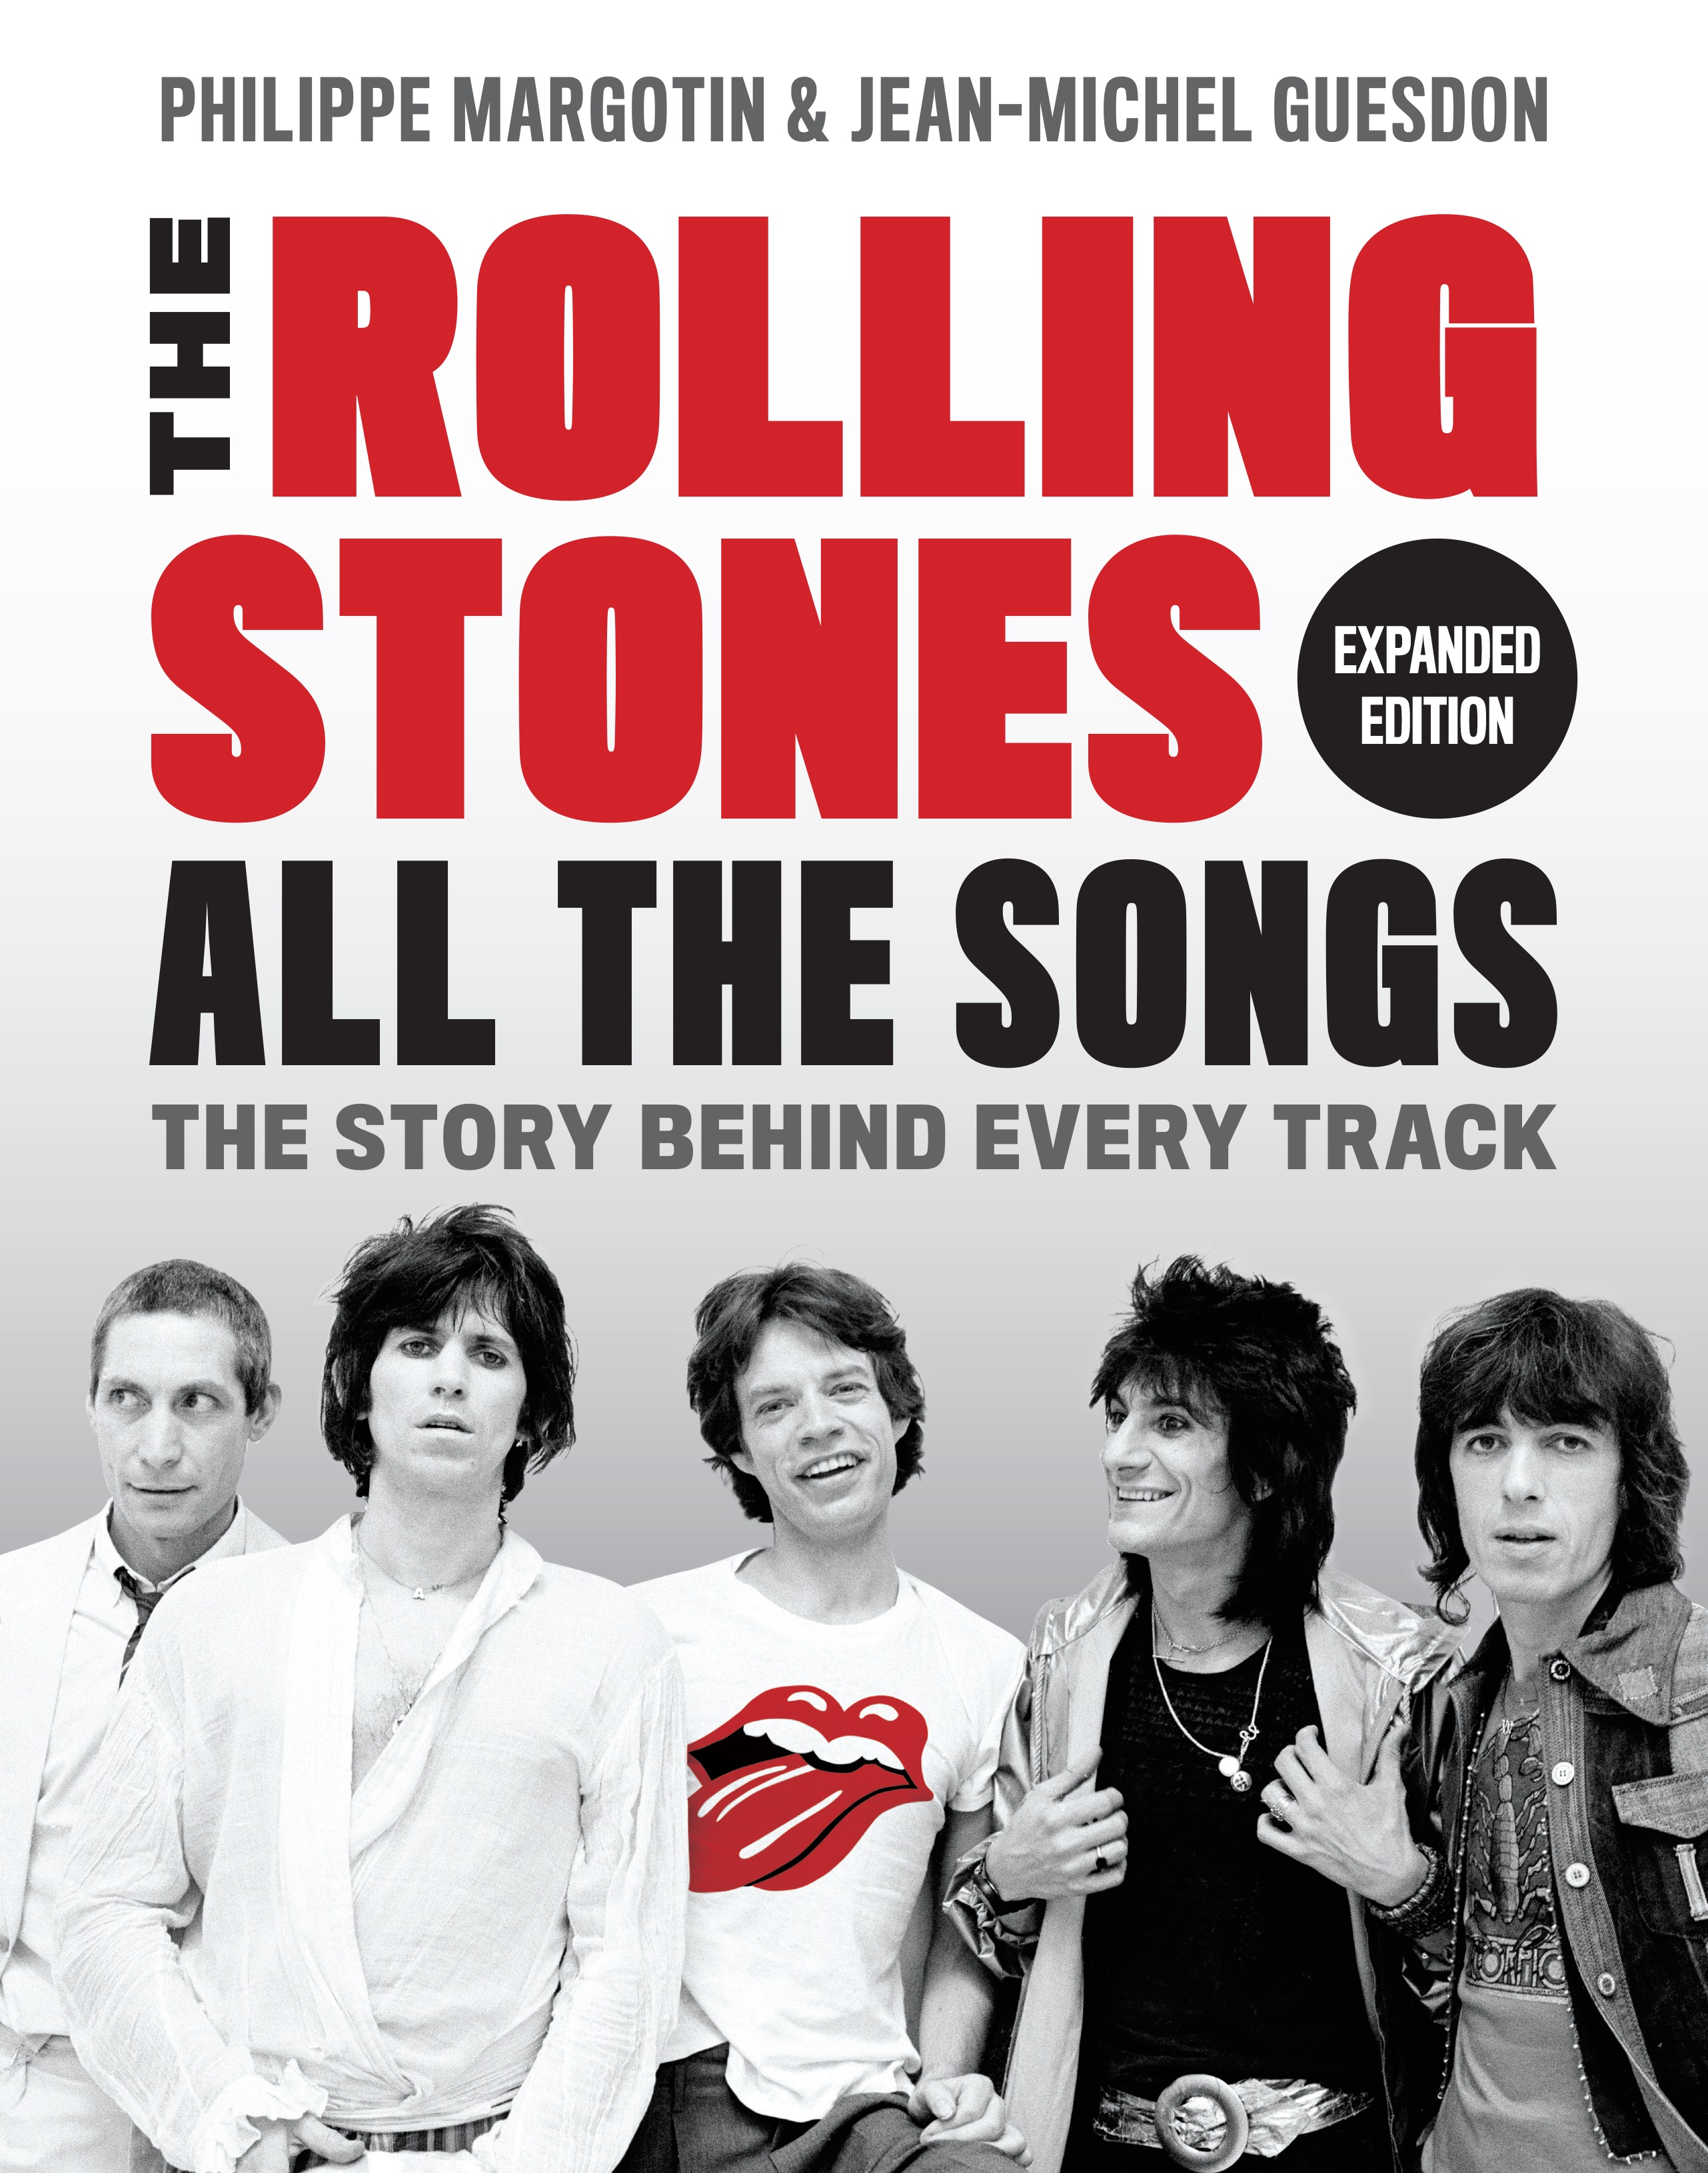 The Rolling Stones All the Songs Expanded Edition by Philippe Margotin Hachette Book Group